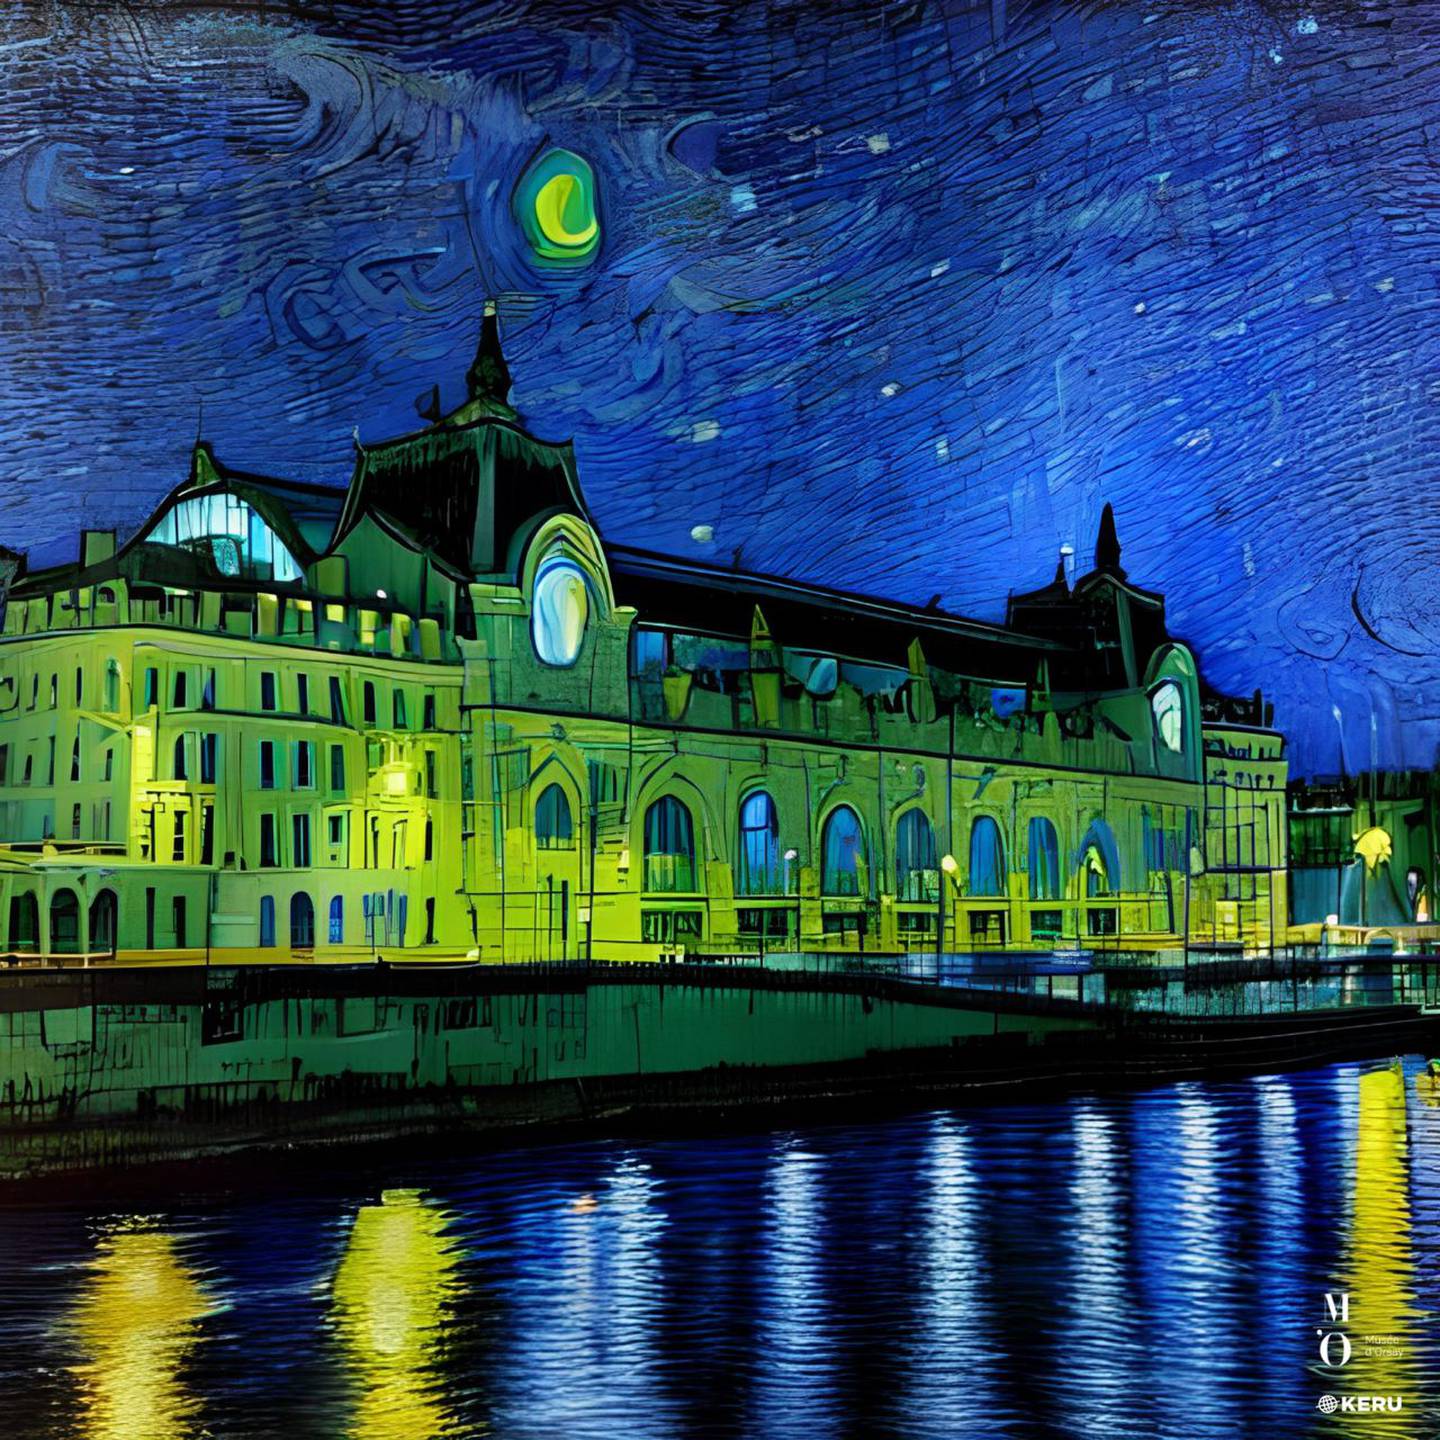 Musée d’Orsay in a starry night, digital souvenir by KERU created for the Musée d’Orsay ©️ Musée d’Orsay and KERU